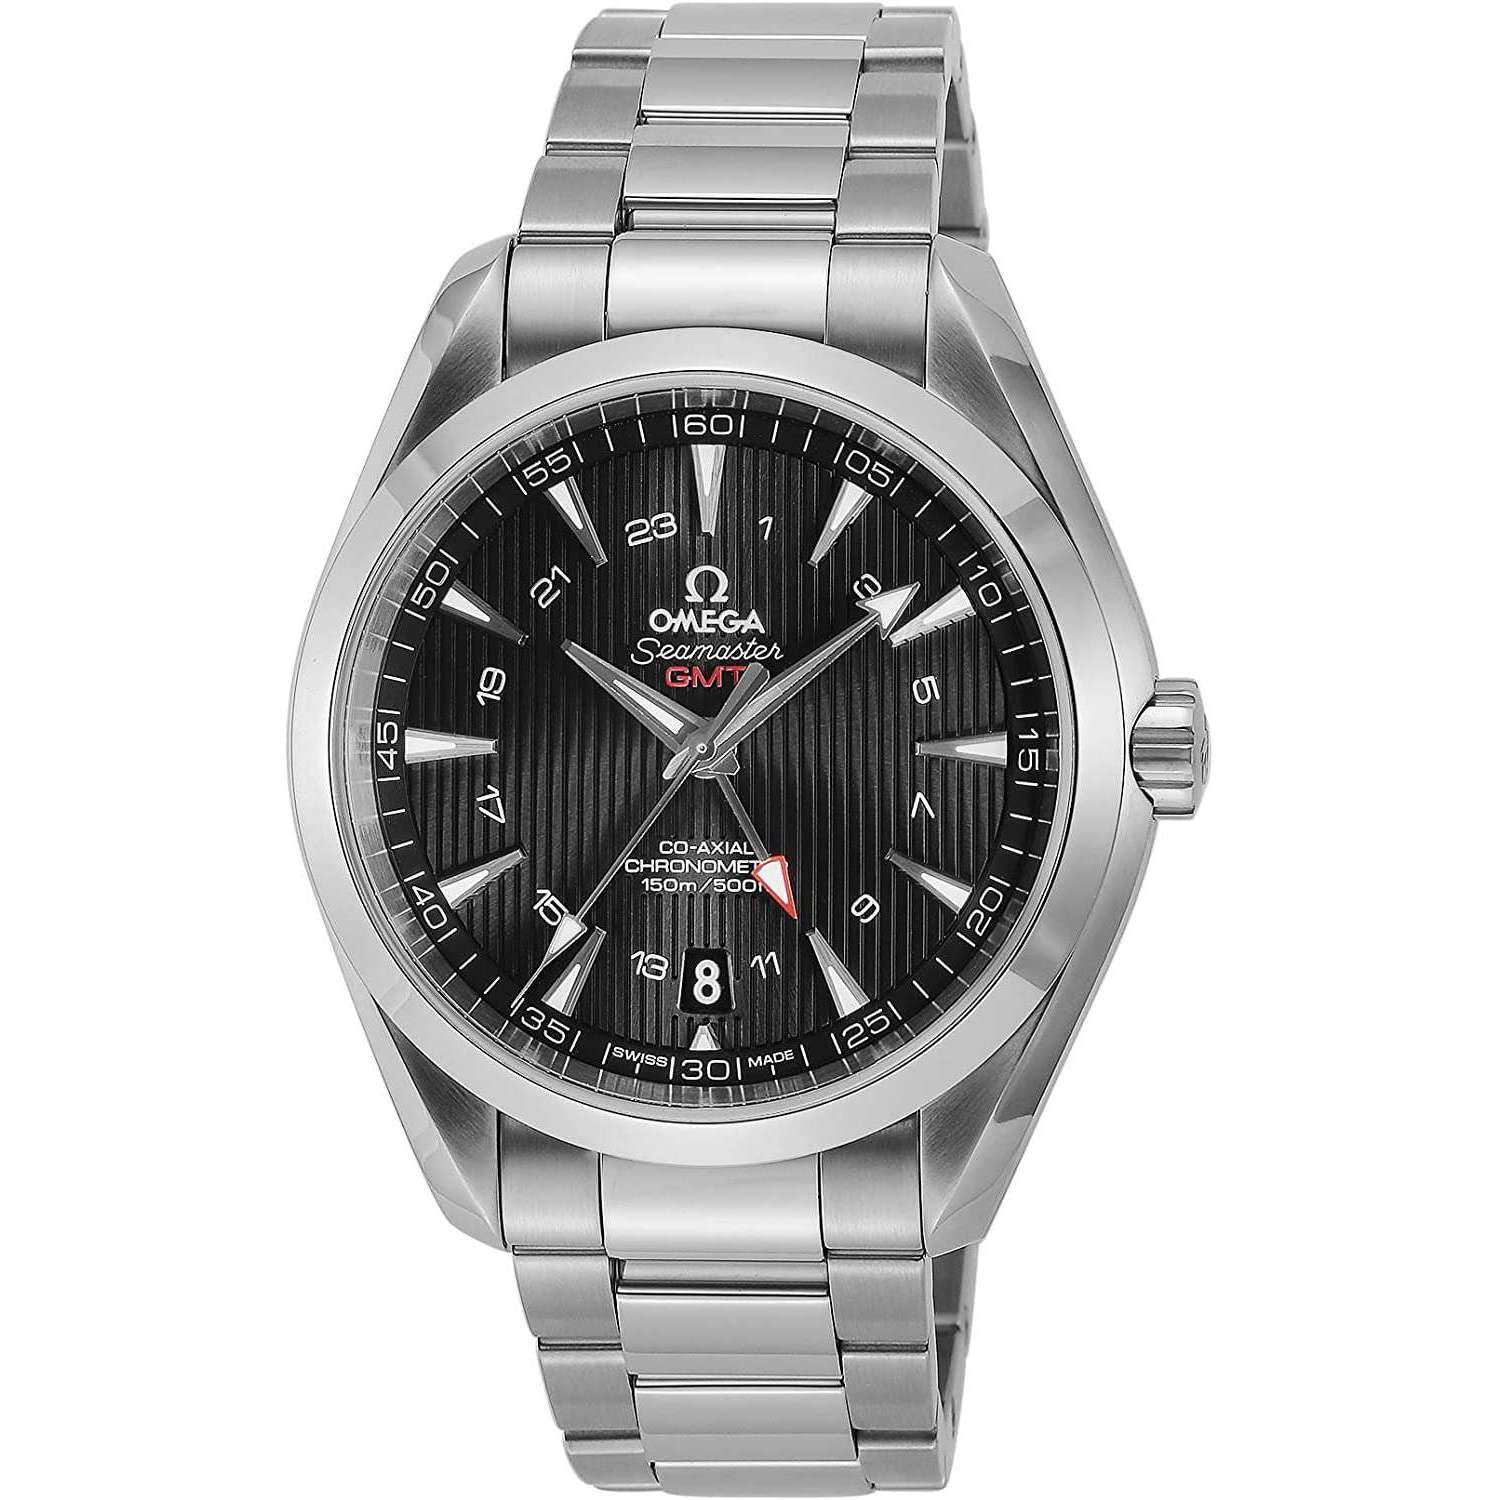 ROOK JAPAN:OMEGA SEAMASTER GMT CO-AXIAL CHRONOMETER 43 MM MEN WATCH 231.10.43.22.01.001,Luxury Watch,Omega